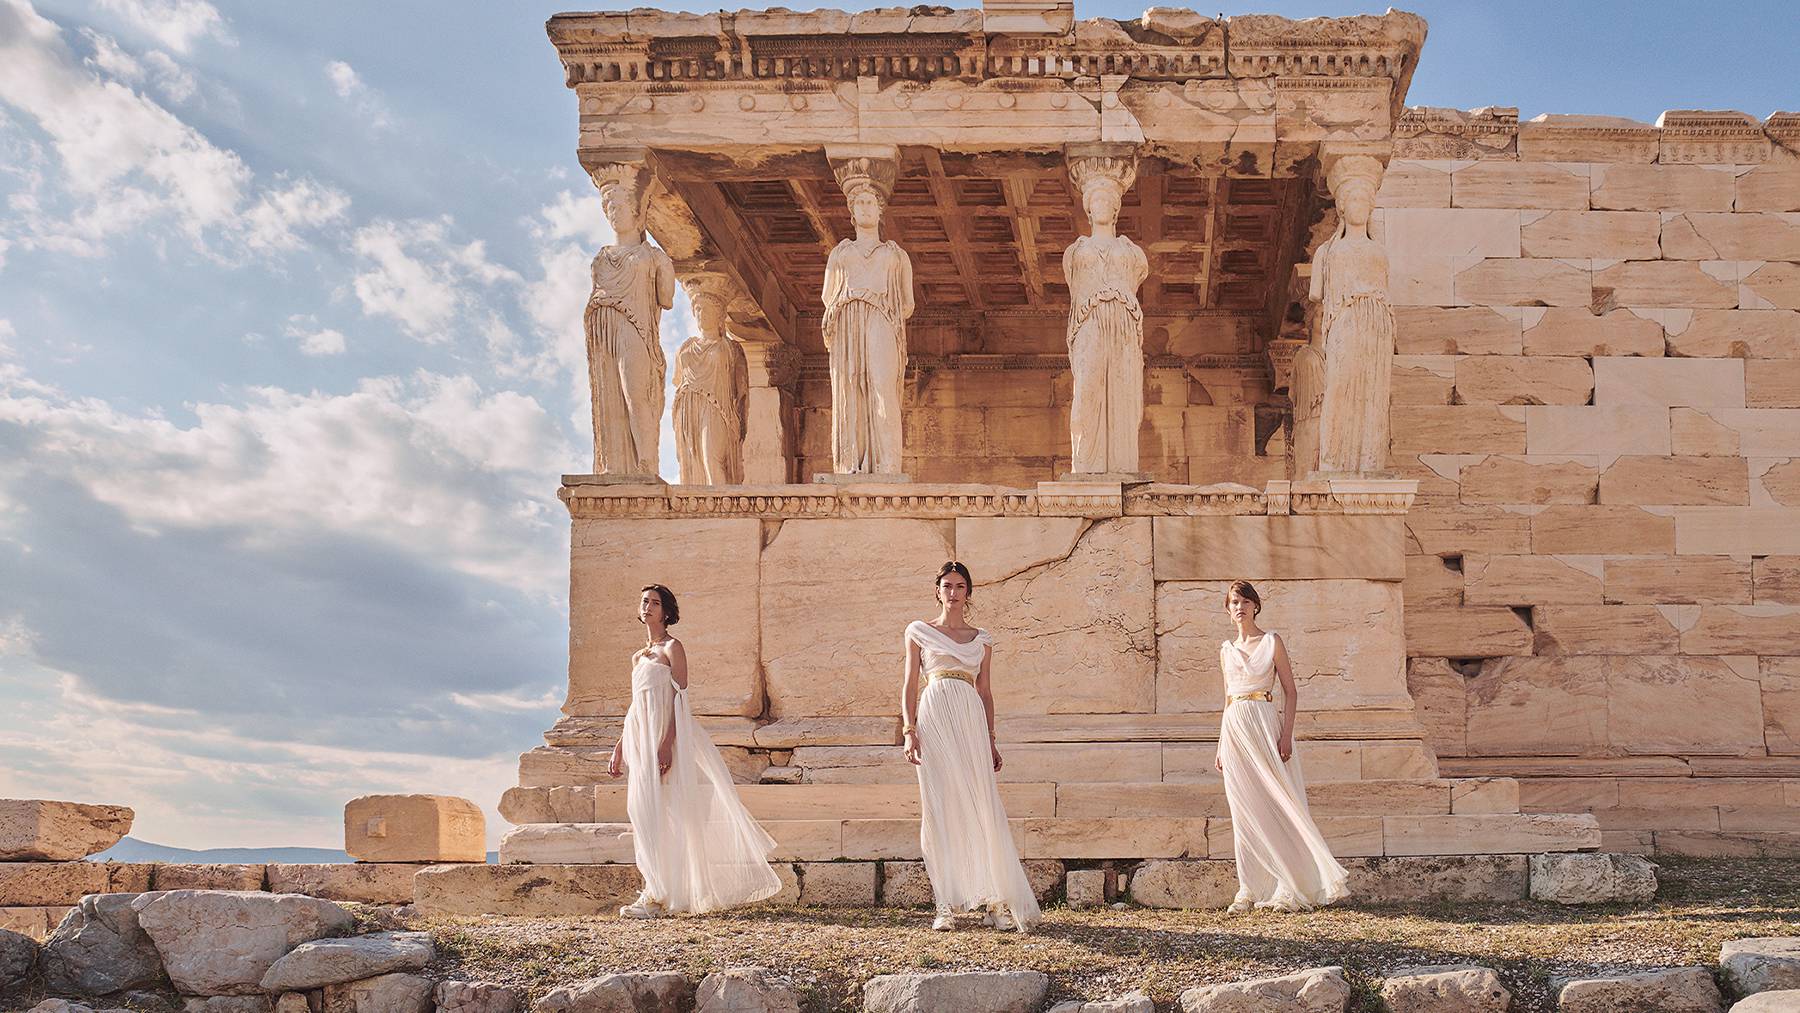 Dior staged its cruise 2022 show at the Acropolis in Athens, Greece.